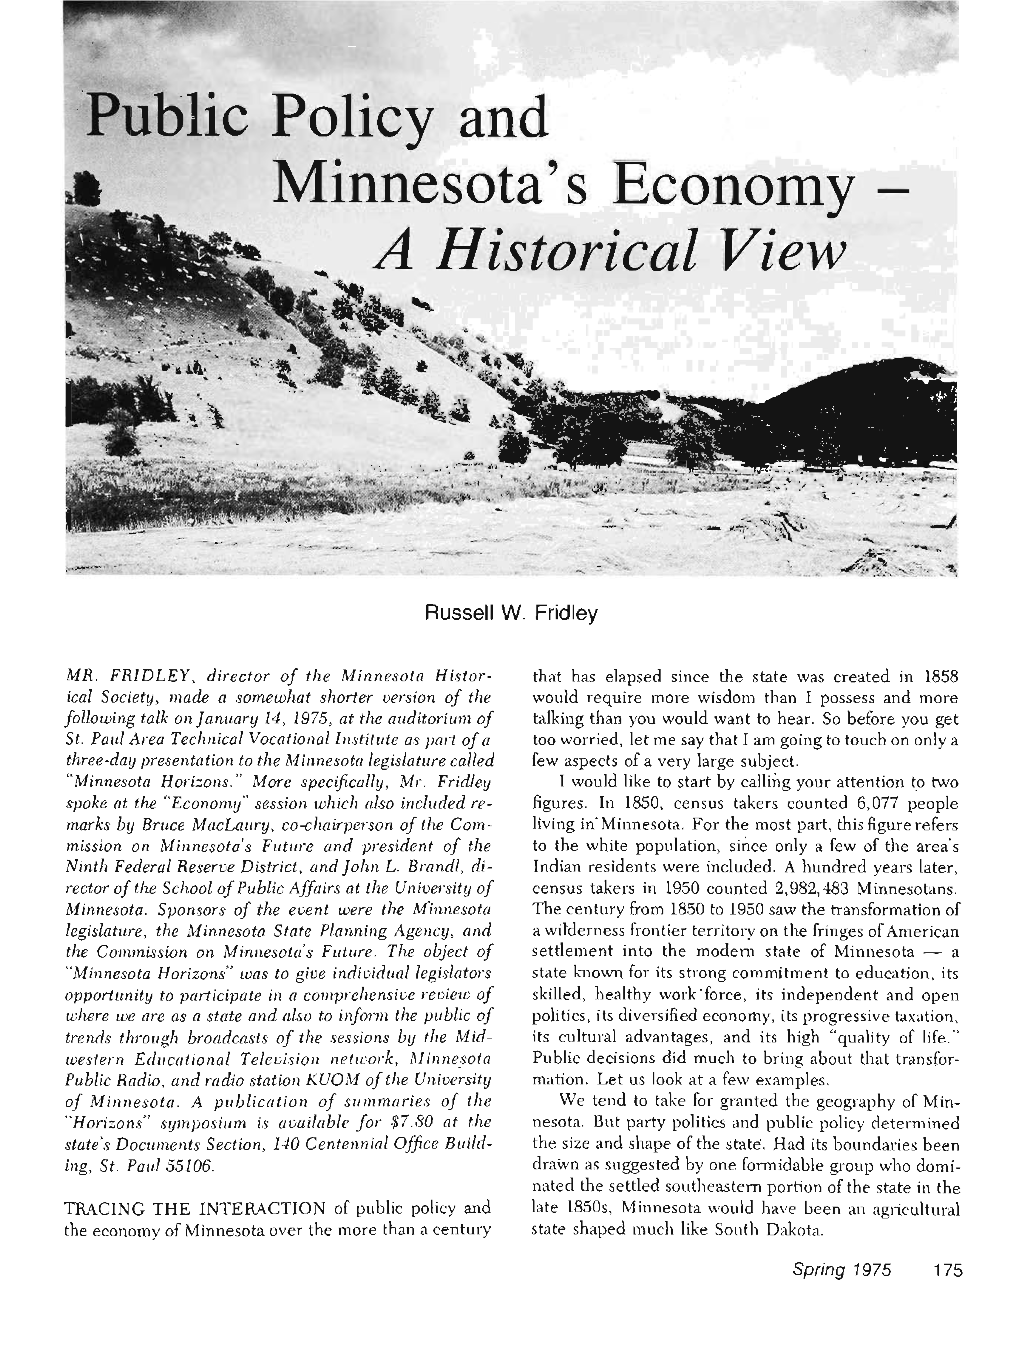 Public Policy and Minnesota's Economy : a Historical View